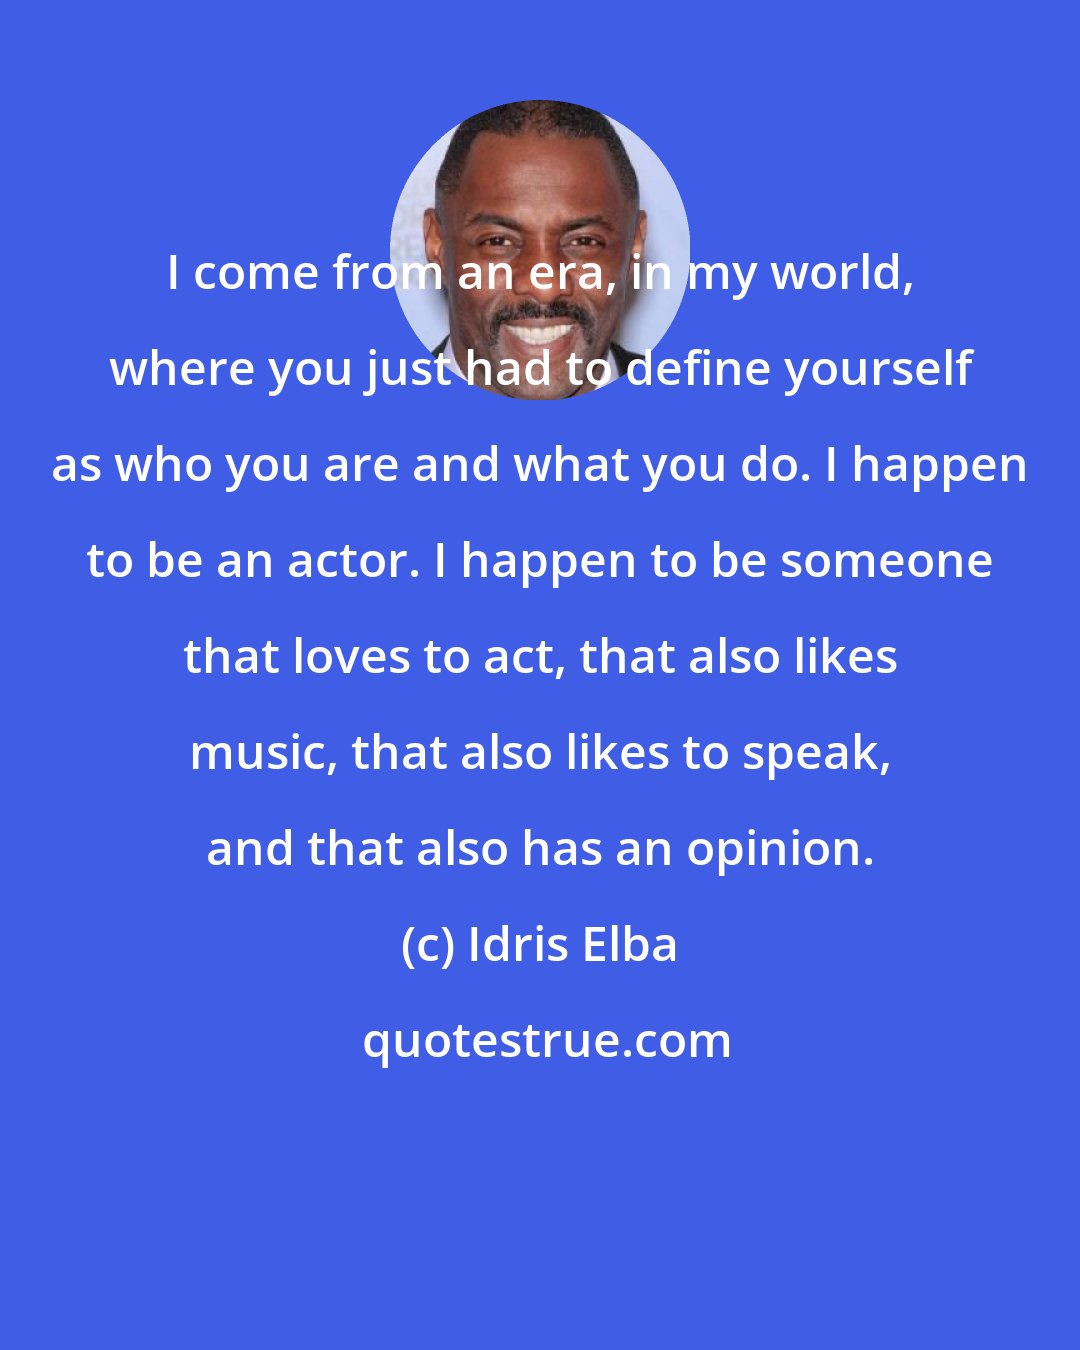 Idris Elba: I come from an era, in my world, where you just had to define yourself as who you are and what you do. I happen to be an actor. I happen to be someone that loves to act, that also likes music, that also likes to speak, and that also has an opinion.